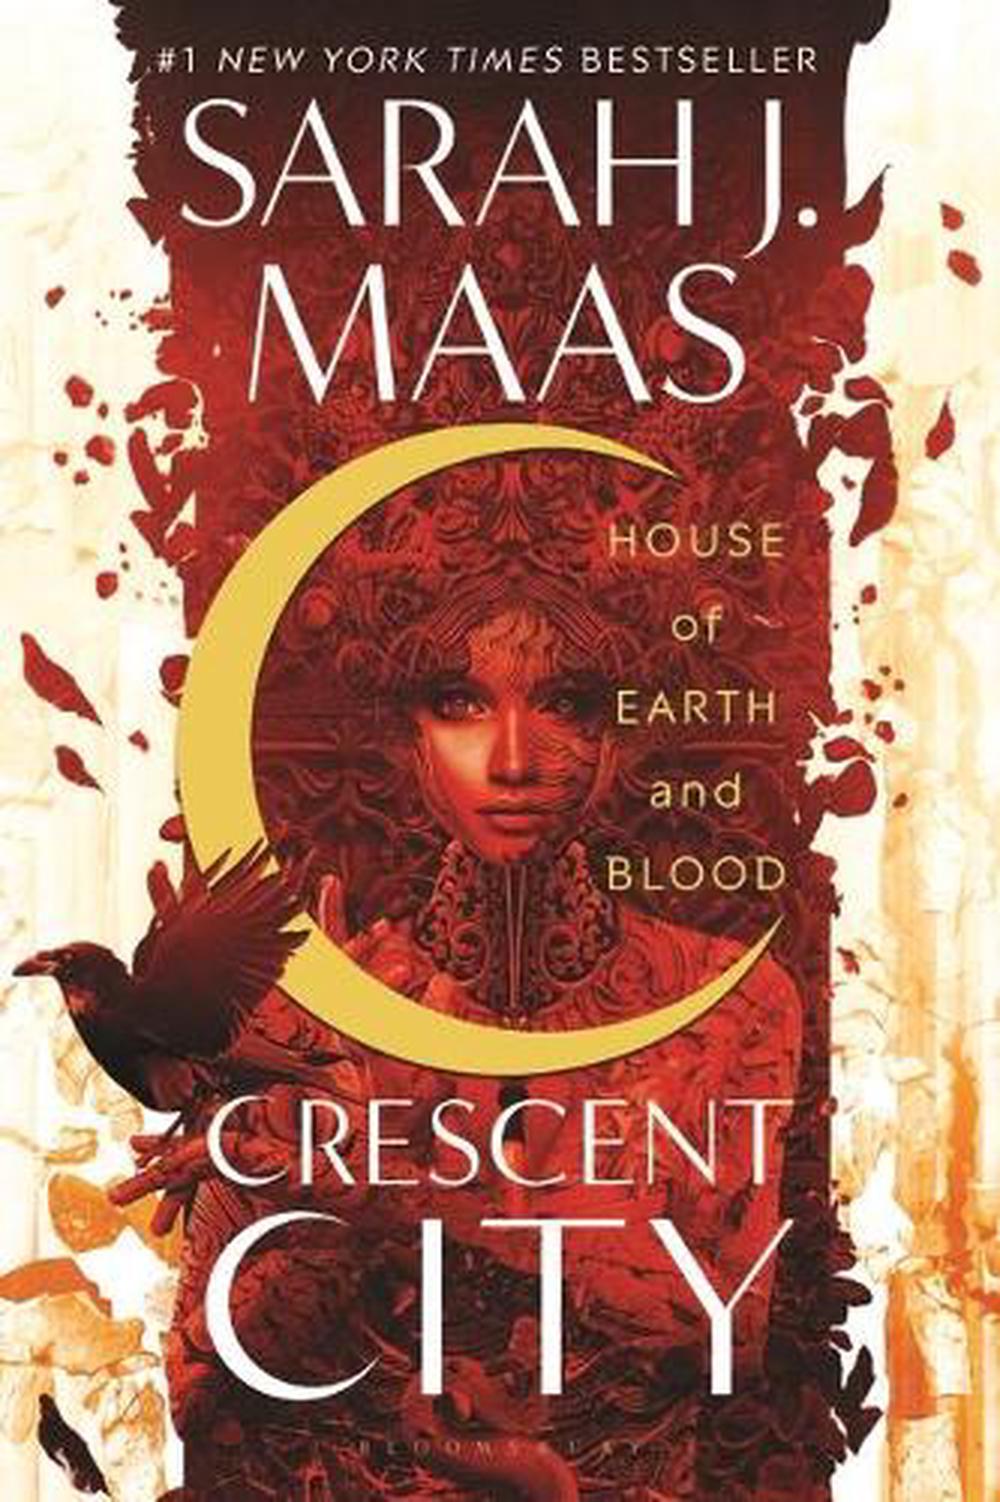 House of Earth and Blood ( Crescent City ) by Sarah Maas, Paperback